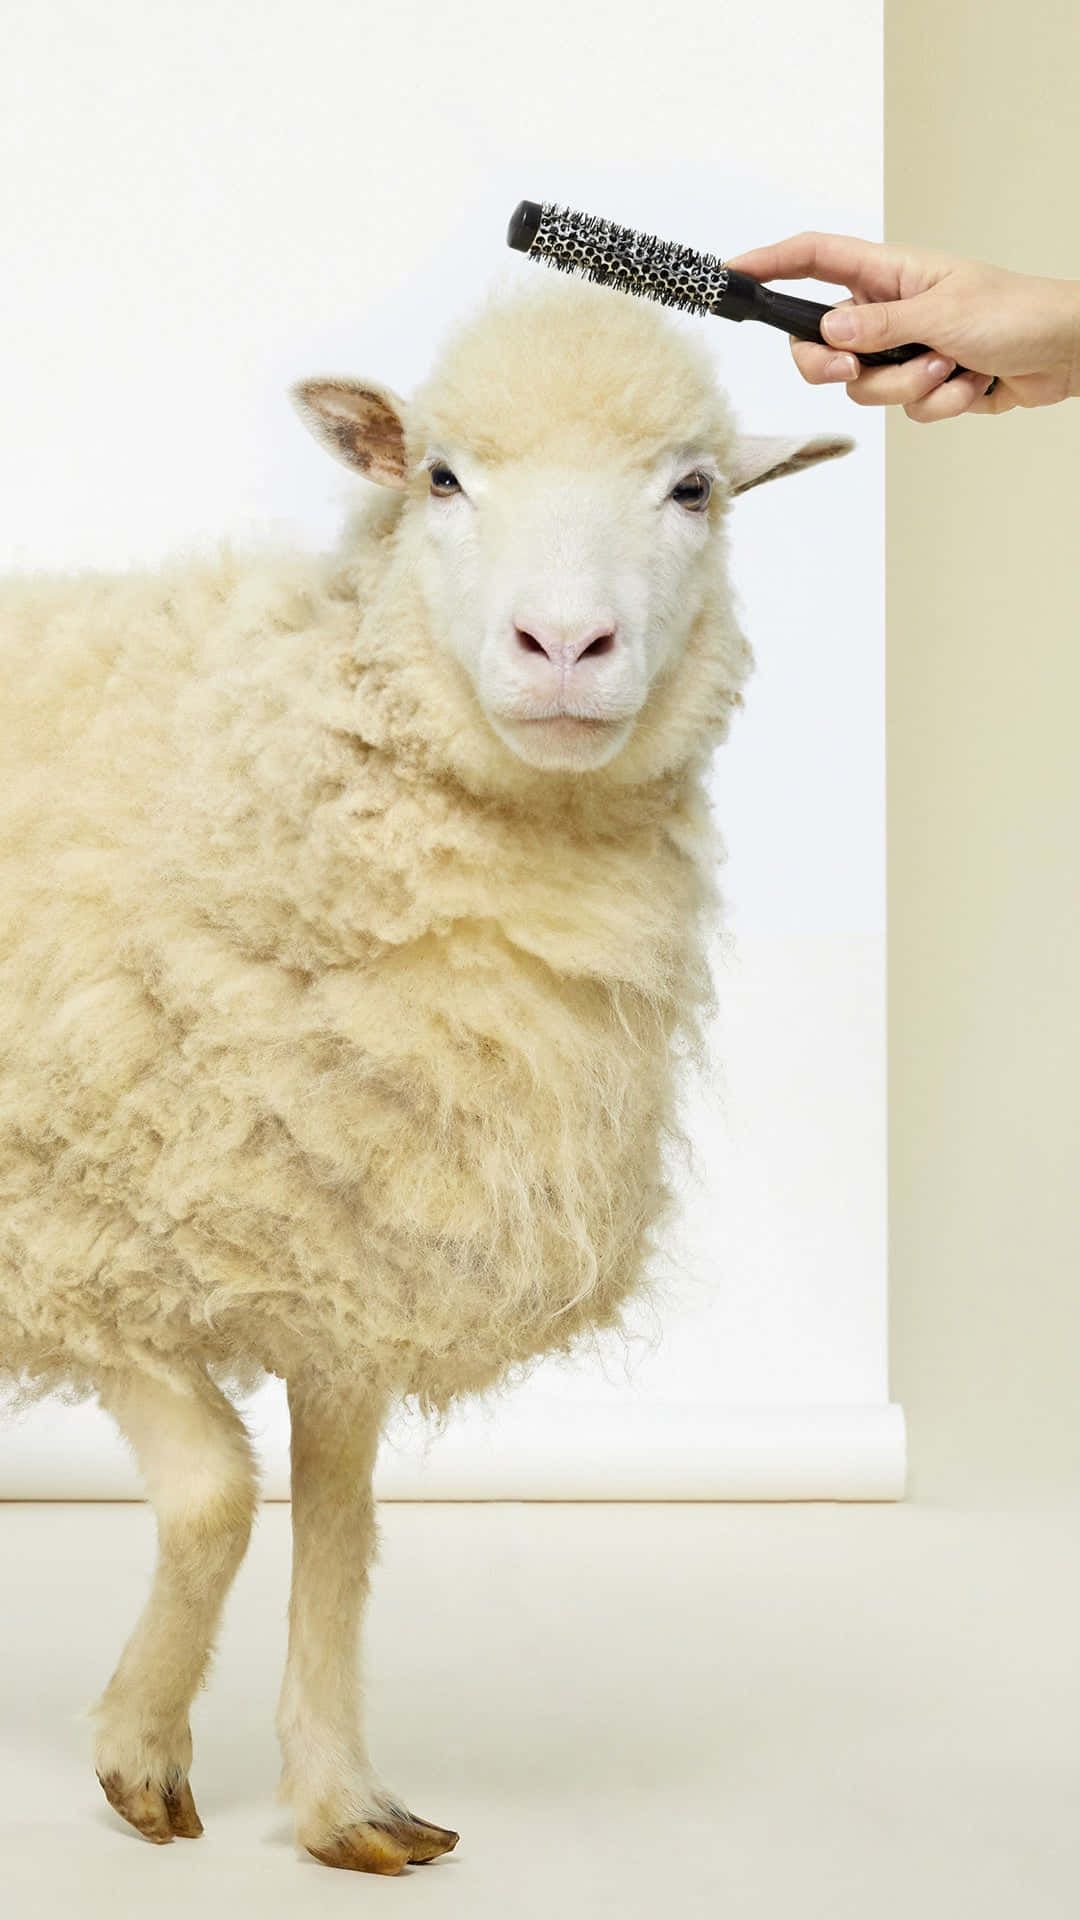 Editorial Photograph Of Sheep For Patou Wallpaper